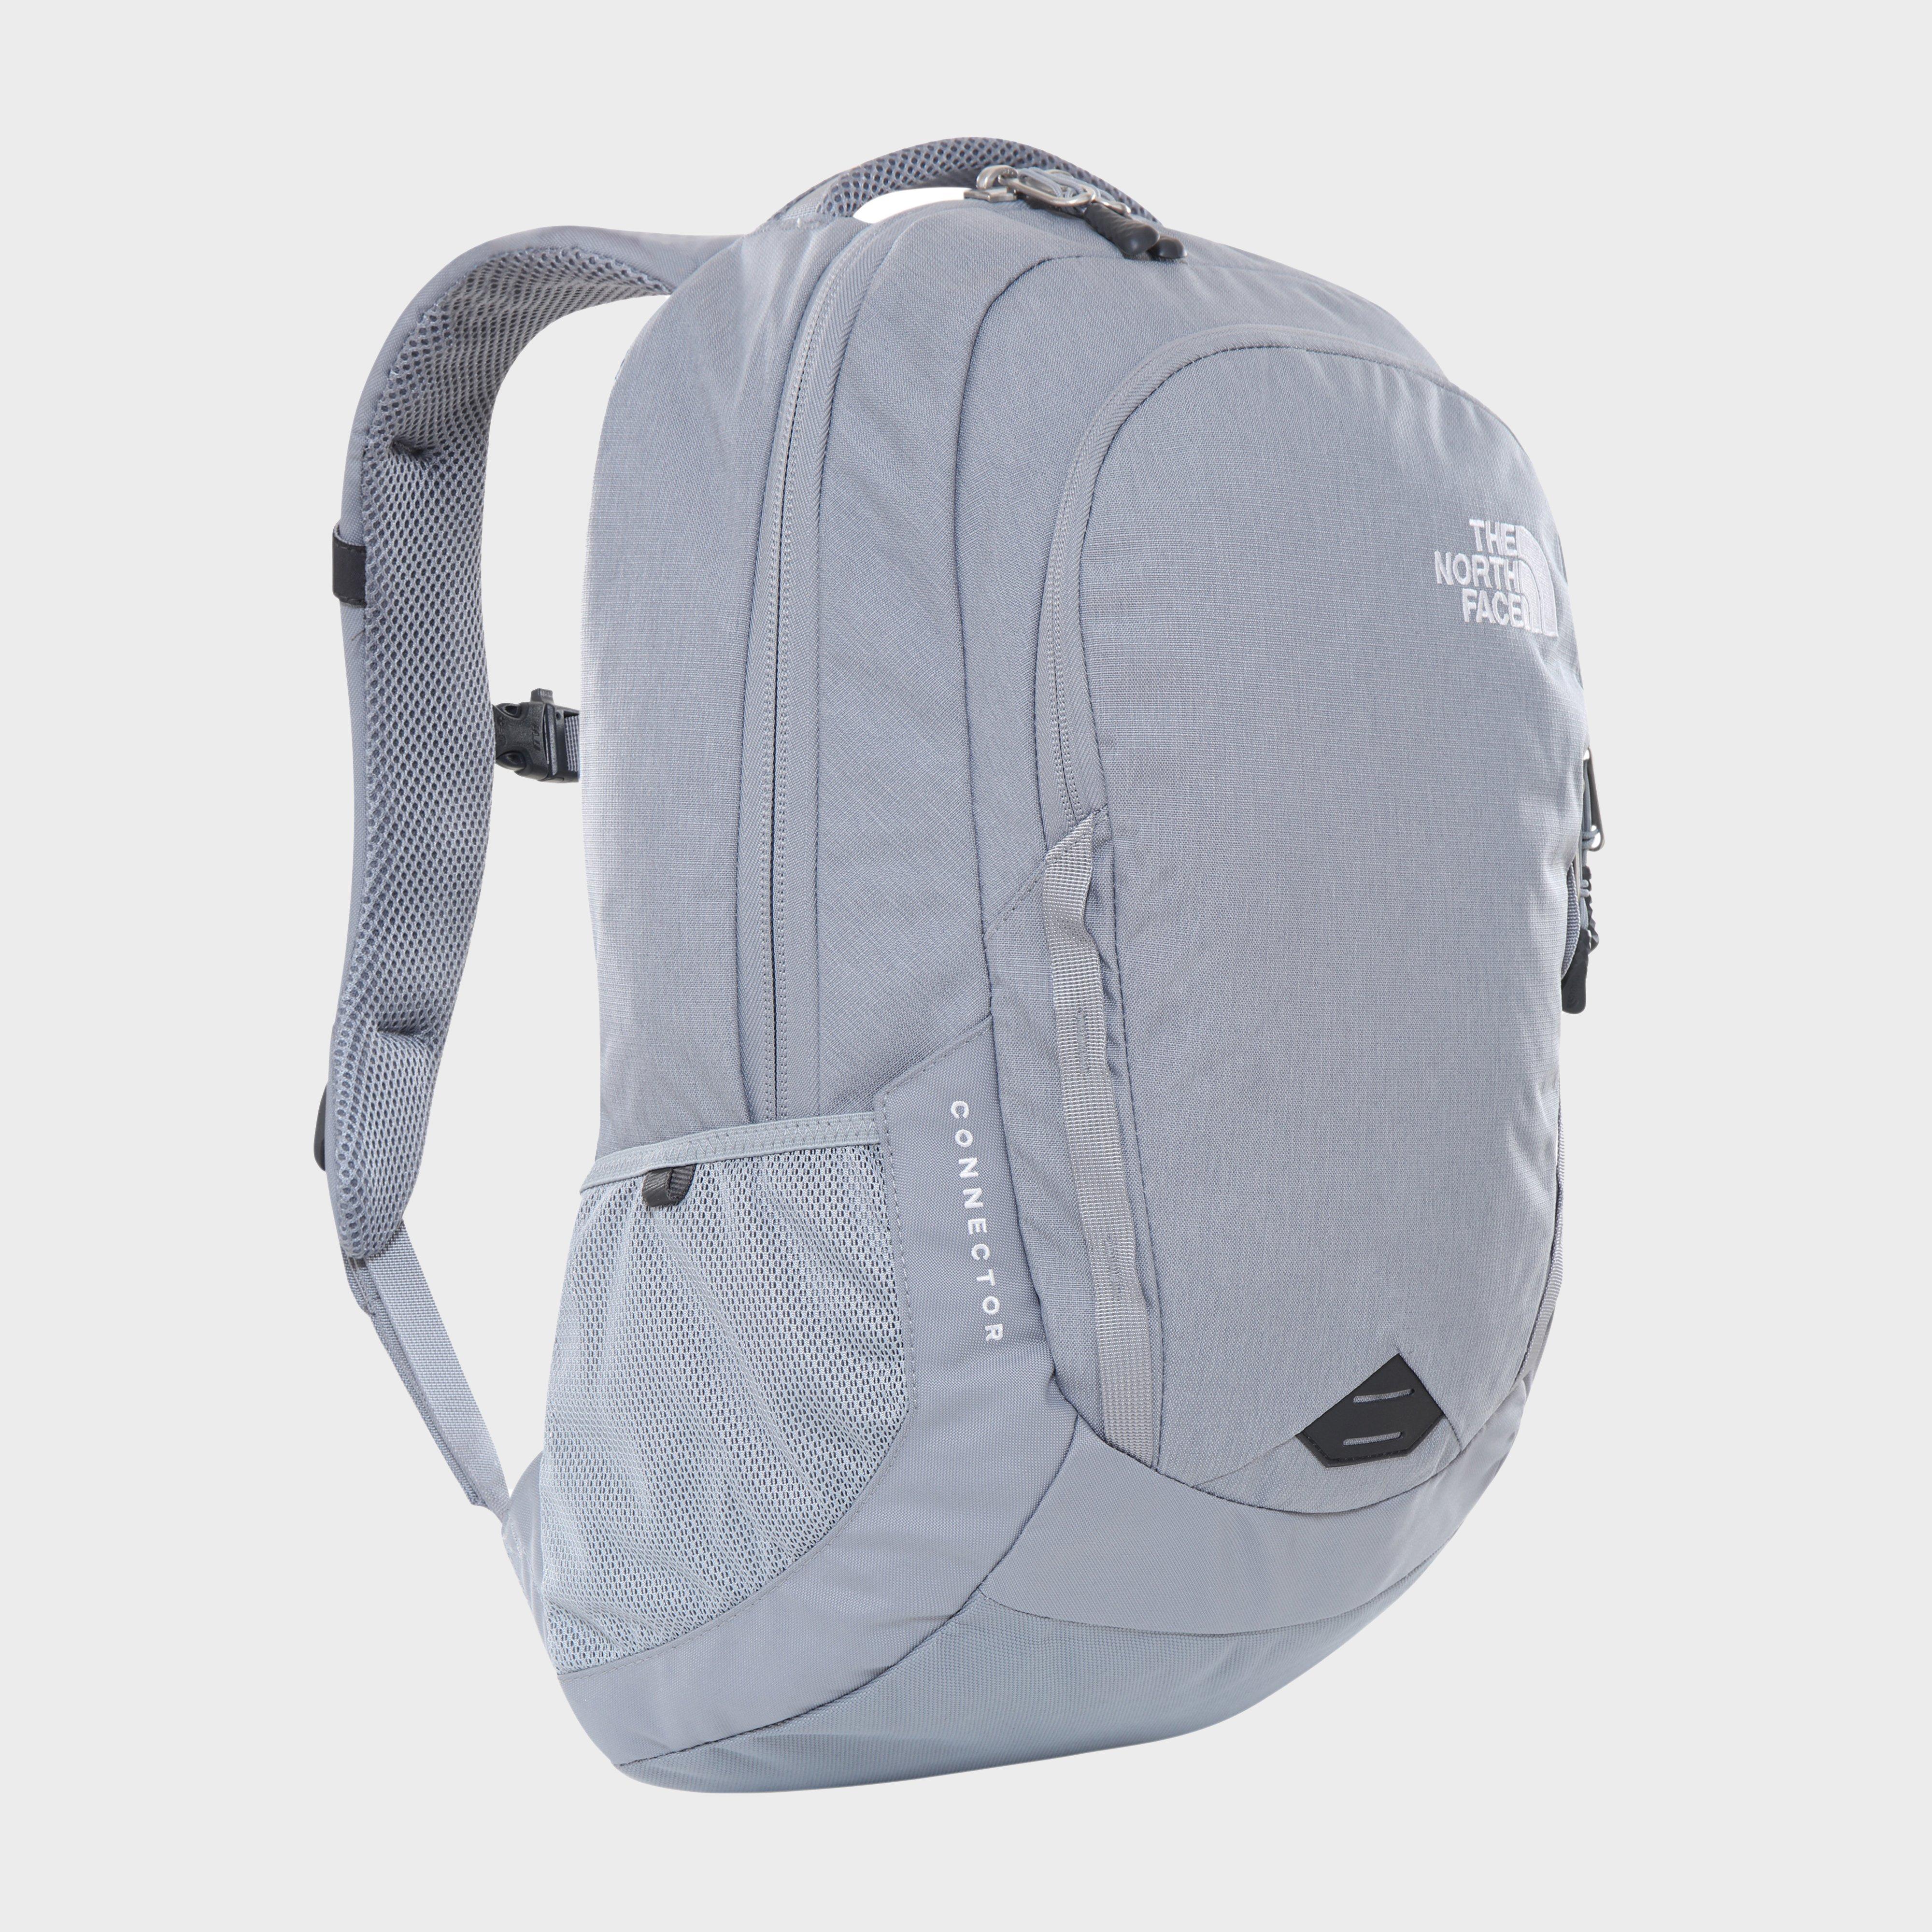  The North Face Connector Daysack